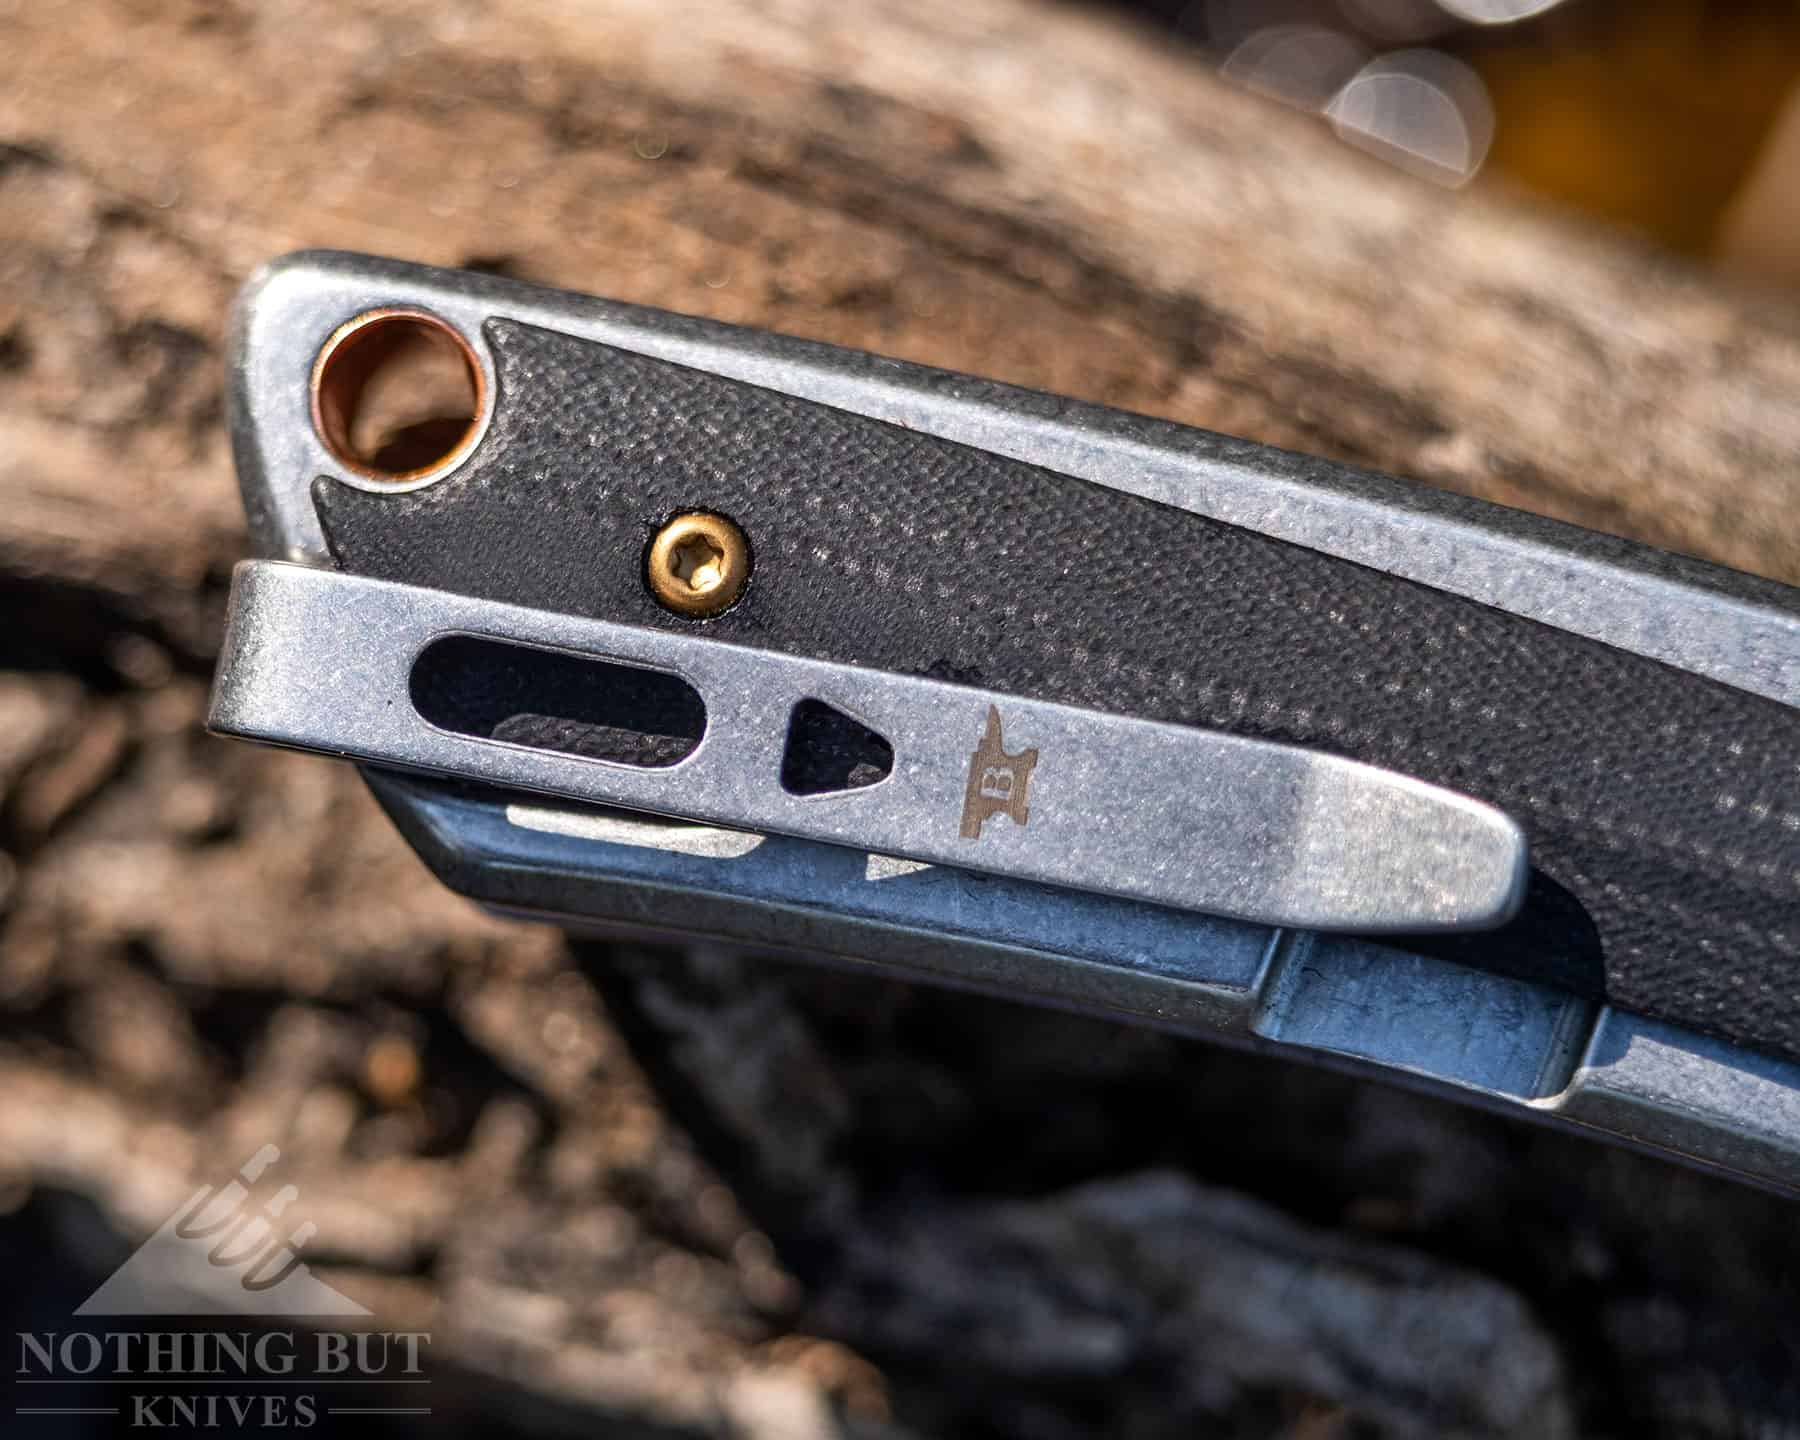 The Buck HiLine Pocket Clip is a bit too tight, but it can be loosened with a nickel.